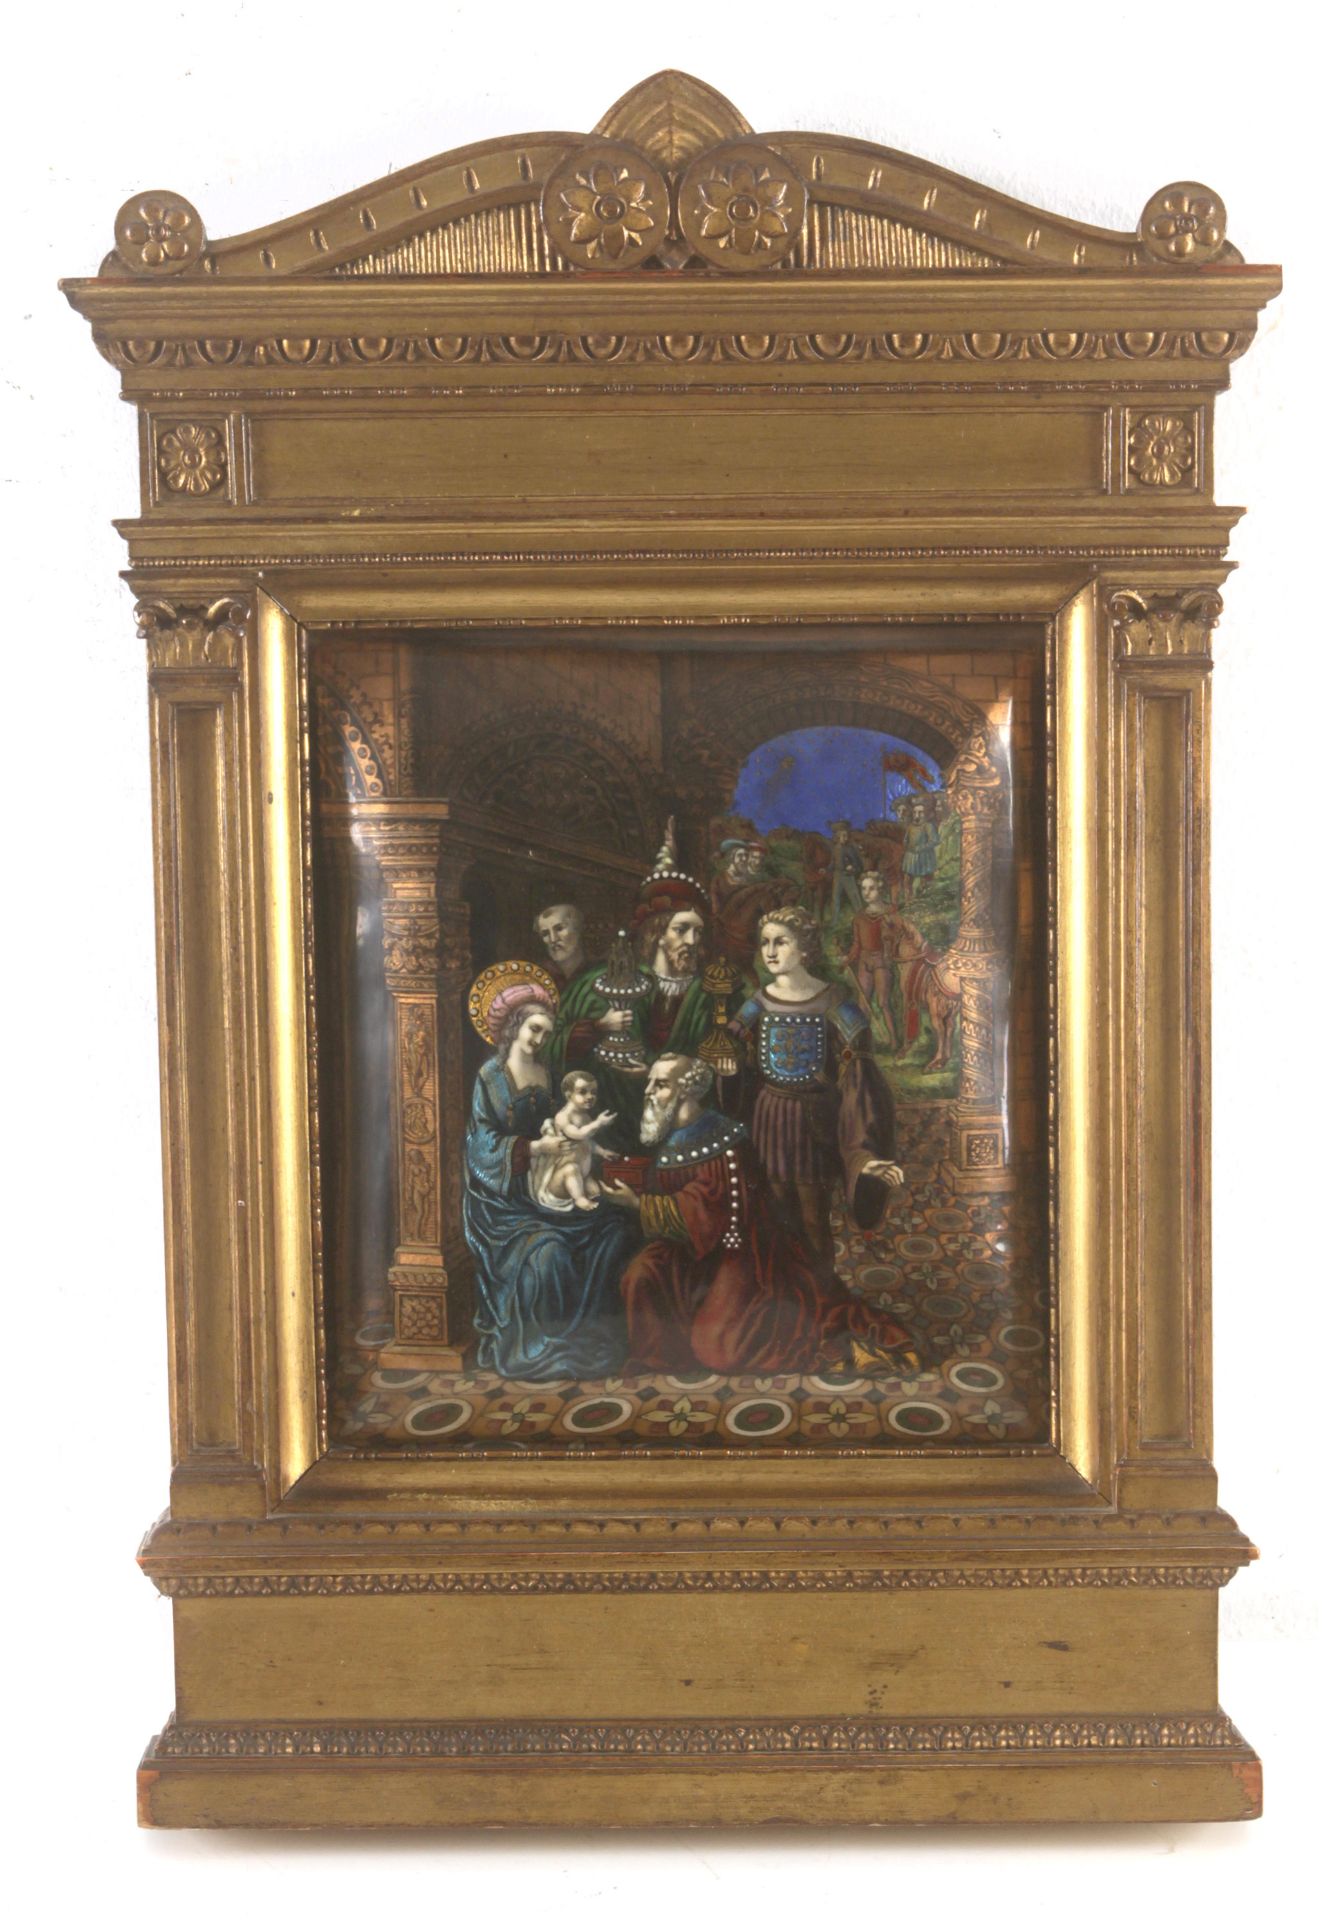 A 19th century devotional plaque in Limoges enamel - Image 2 of 4